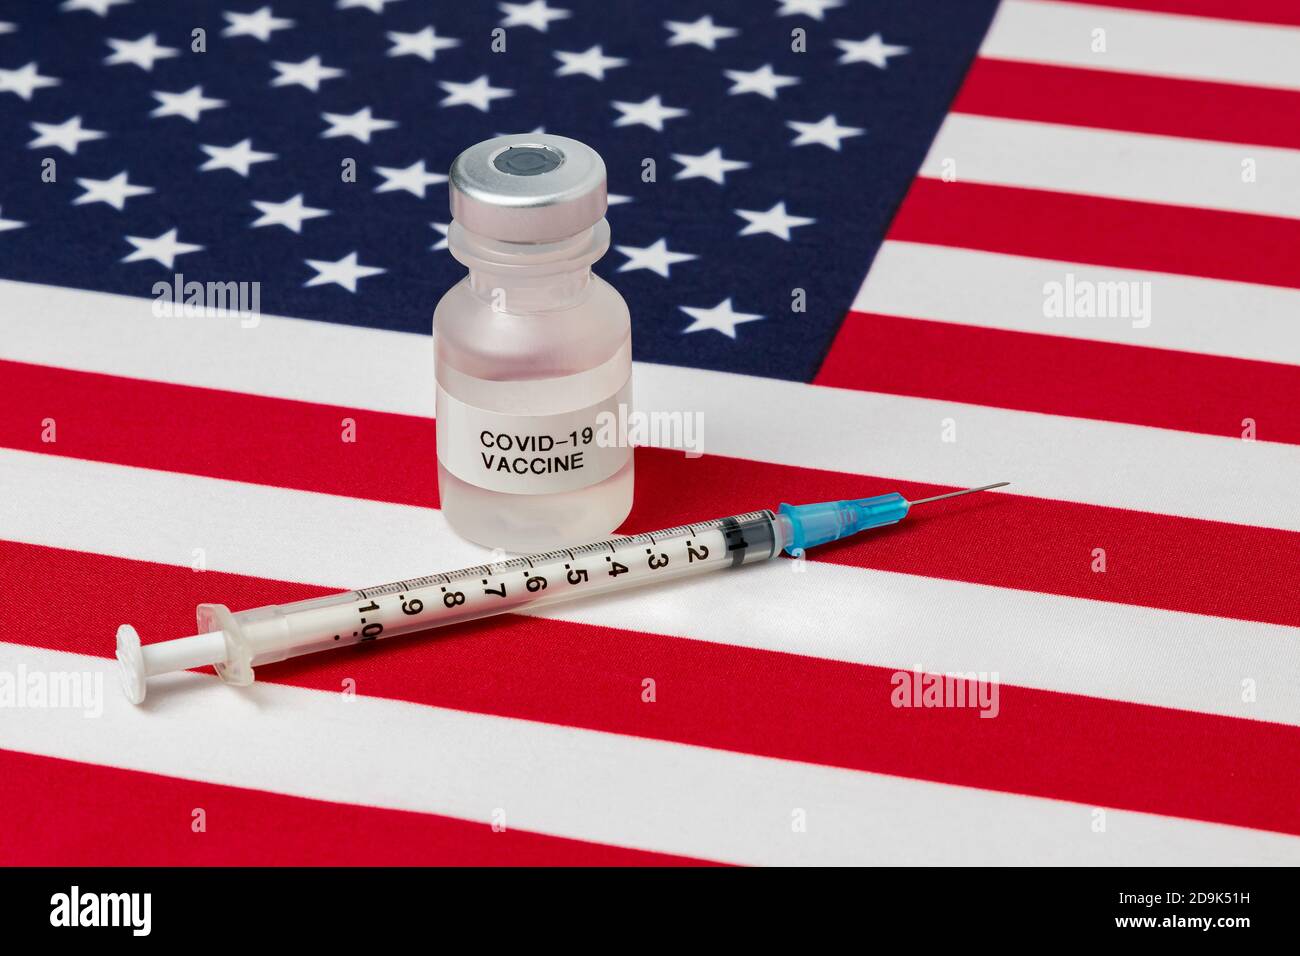 vial with Covid-19 vaccine, syringe and needle on United States of America flag. Concept of medical research and treatment, coronavirus pandemic Stock Photo